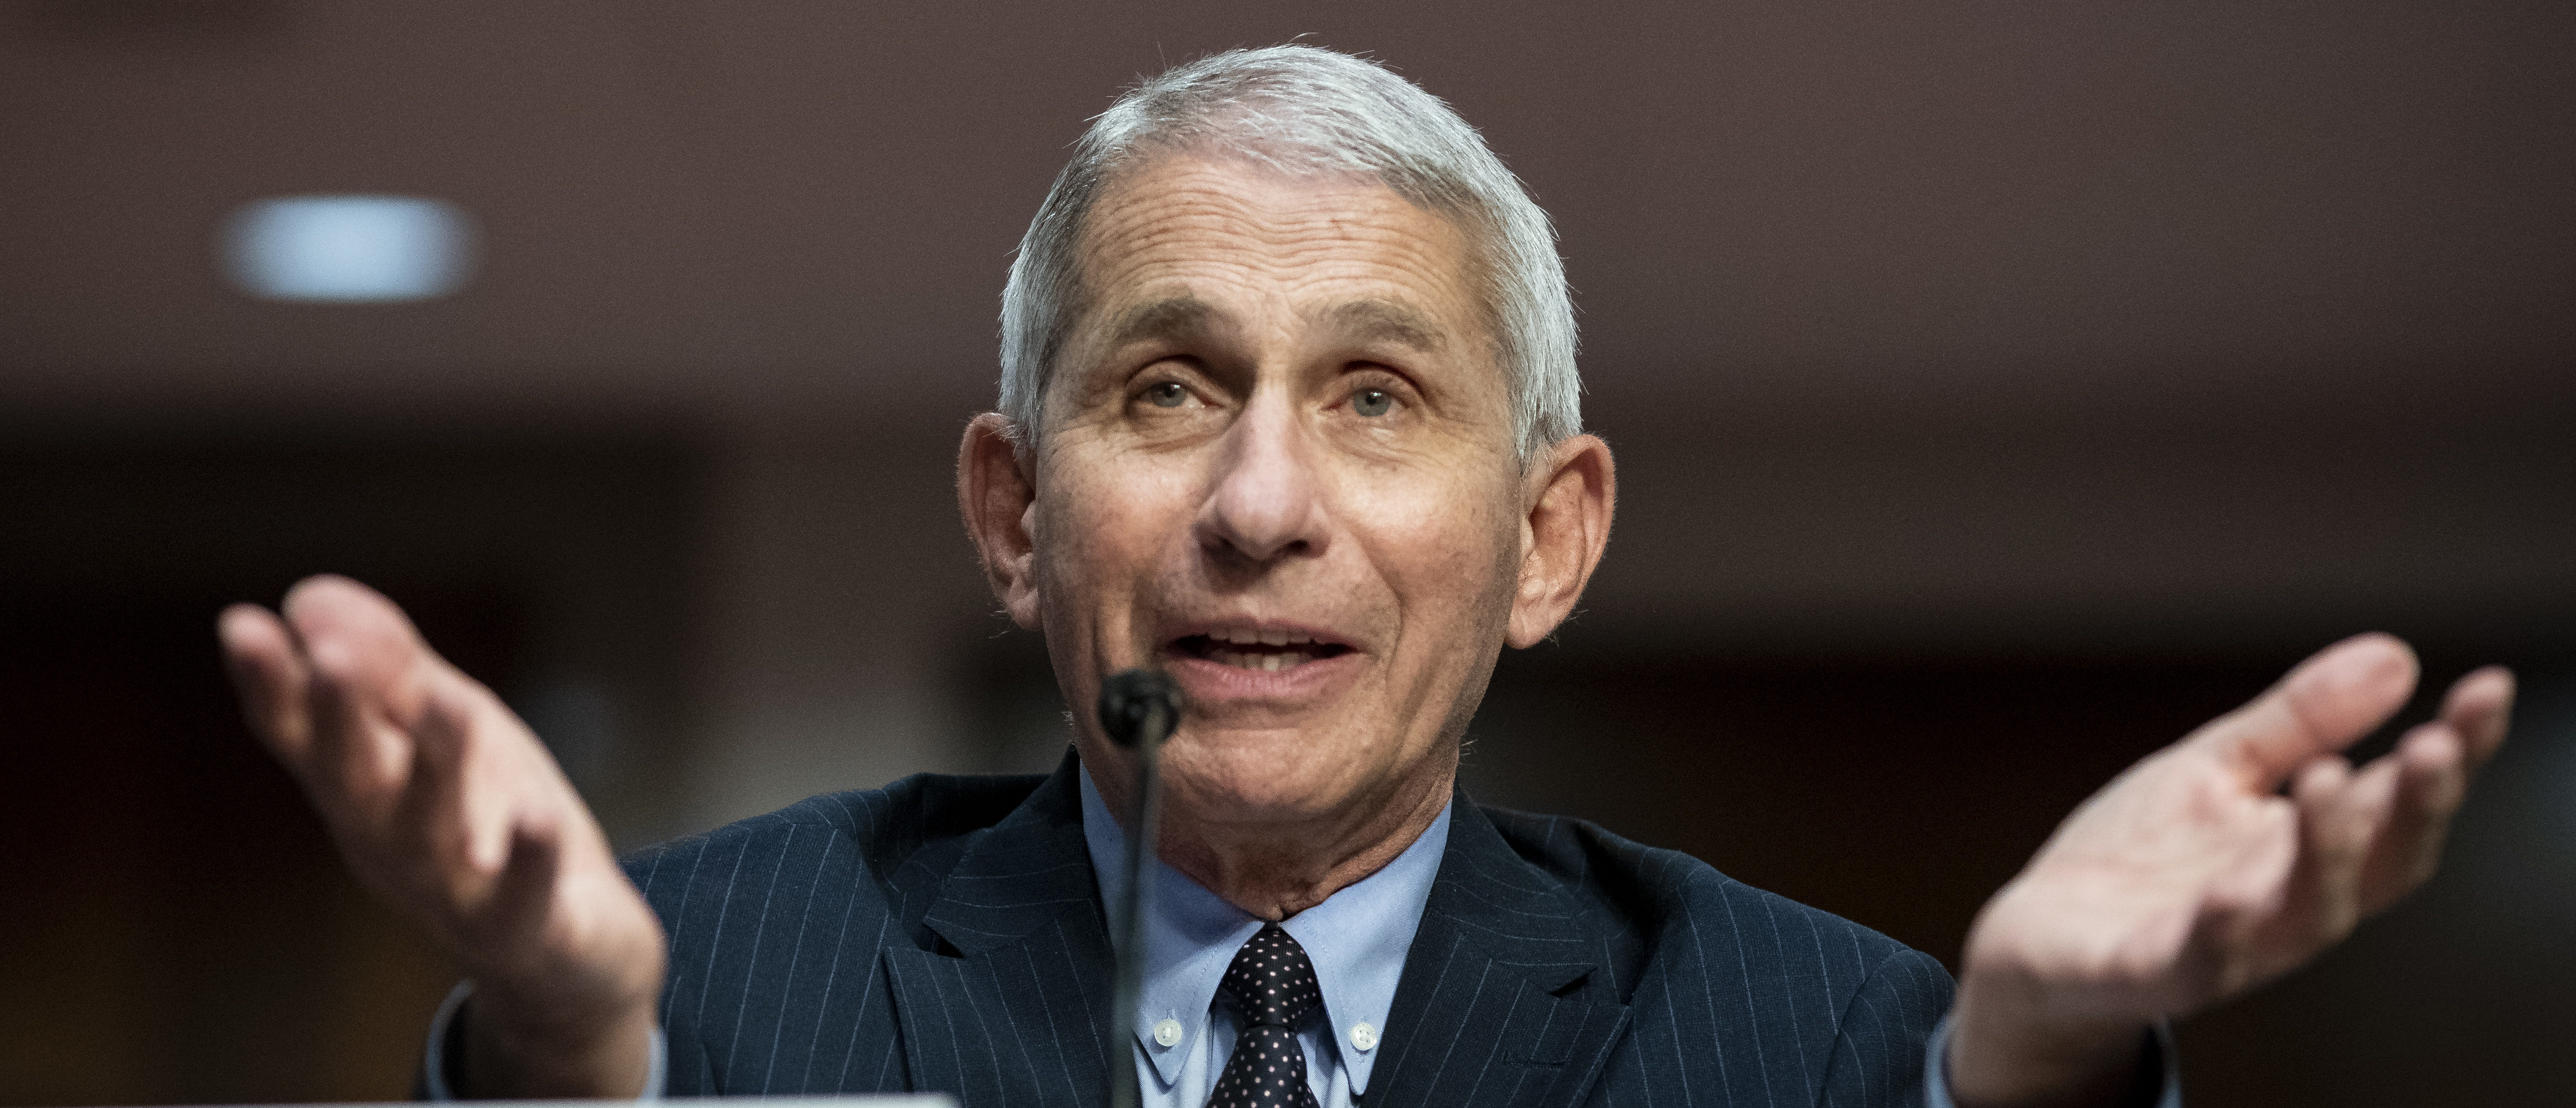 WASHINGTON, DC - JUNE 30: Dr. Anthony Fauci, director of the National Institute of Allergy and Infectious Diseases, speaks during a Senate Health, Education, Labor and Pensions Committee hearing on June 30, 2020 in Washington, DC. Top federal health officials discussed efforts for safely getting back to work and school during the coronavirus pandemic. (Photo by Al Drago - Pool/Getty Images)